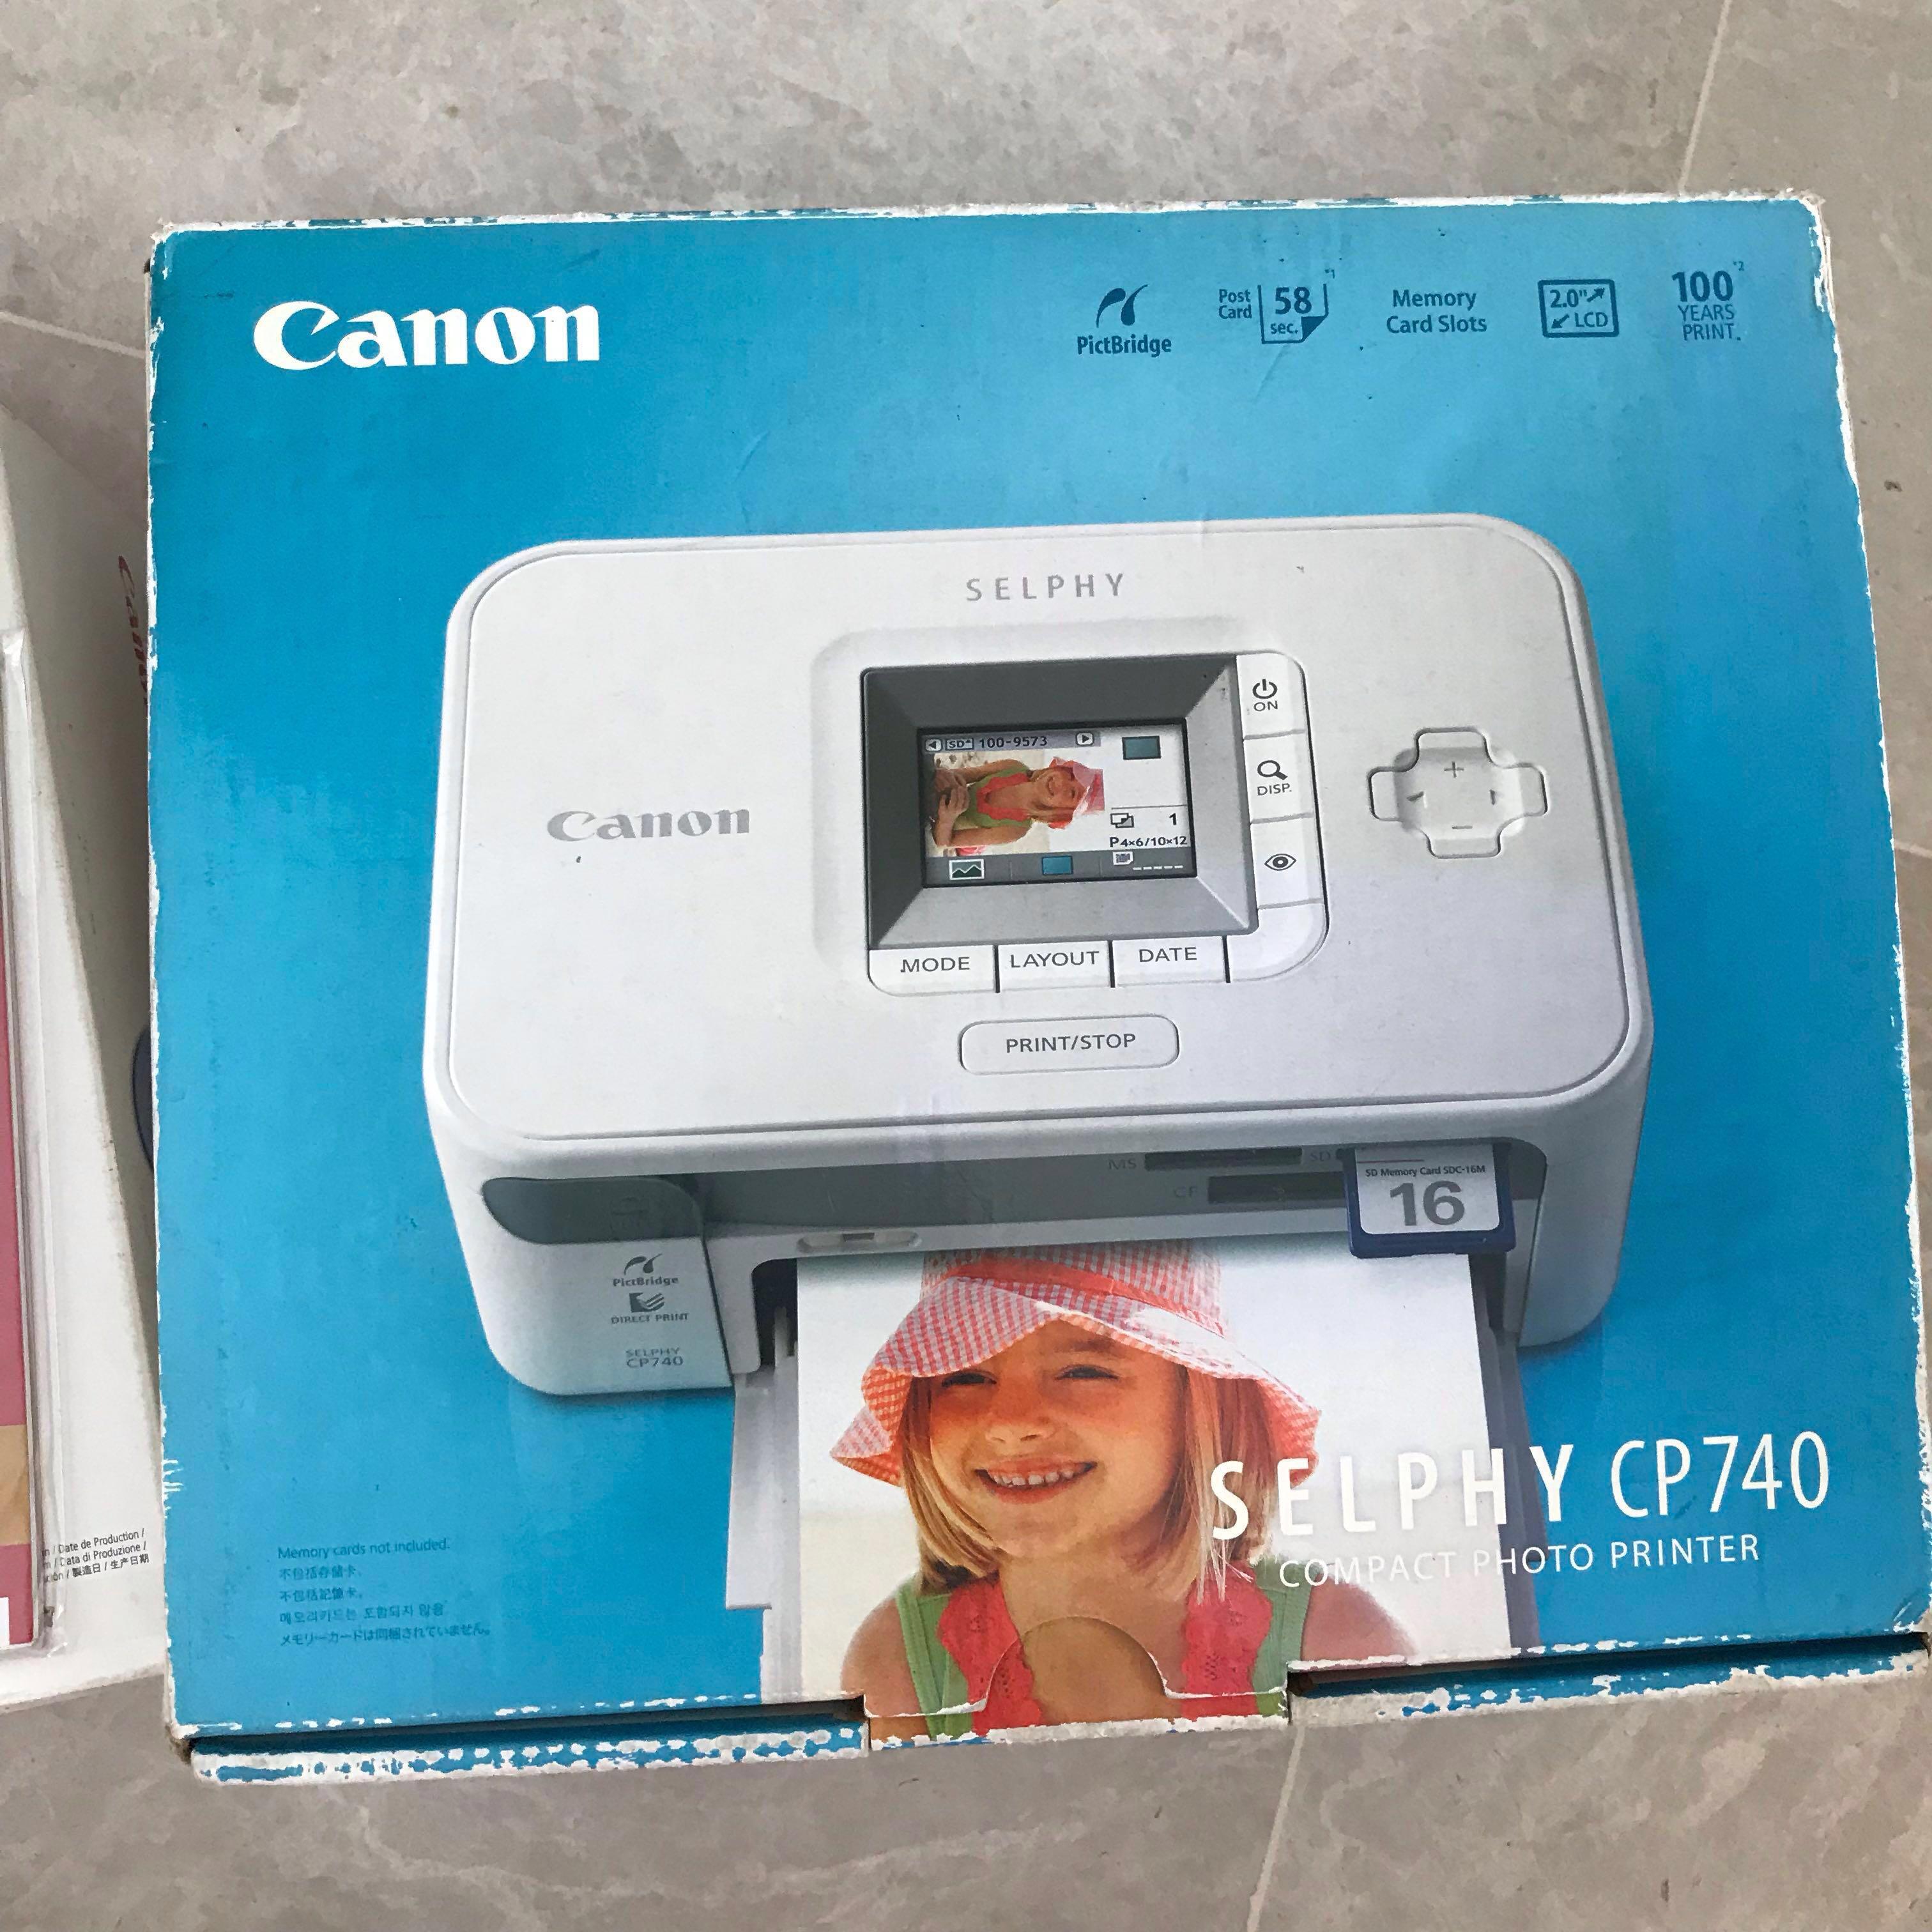 Canon Selphy Cp740 Compact Photo Printer Set Computers And Tech Printers Scanners And Copiers On 6980